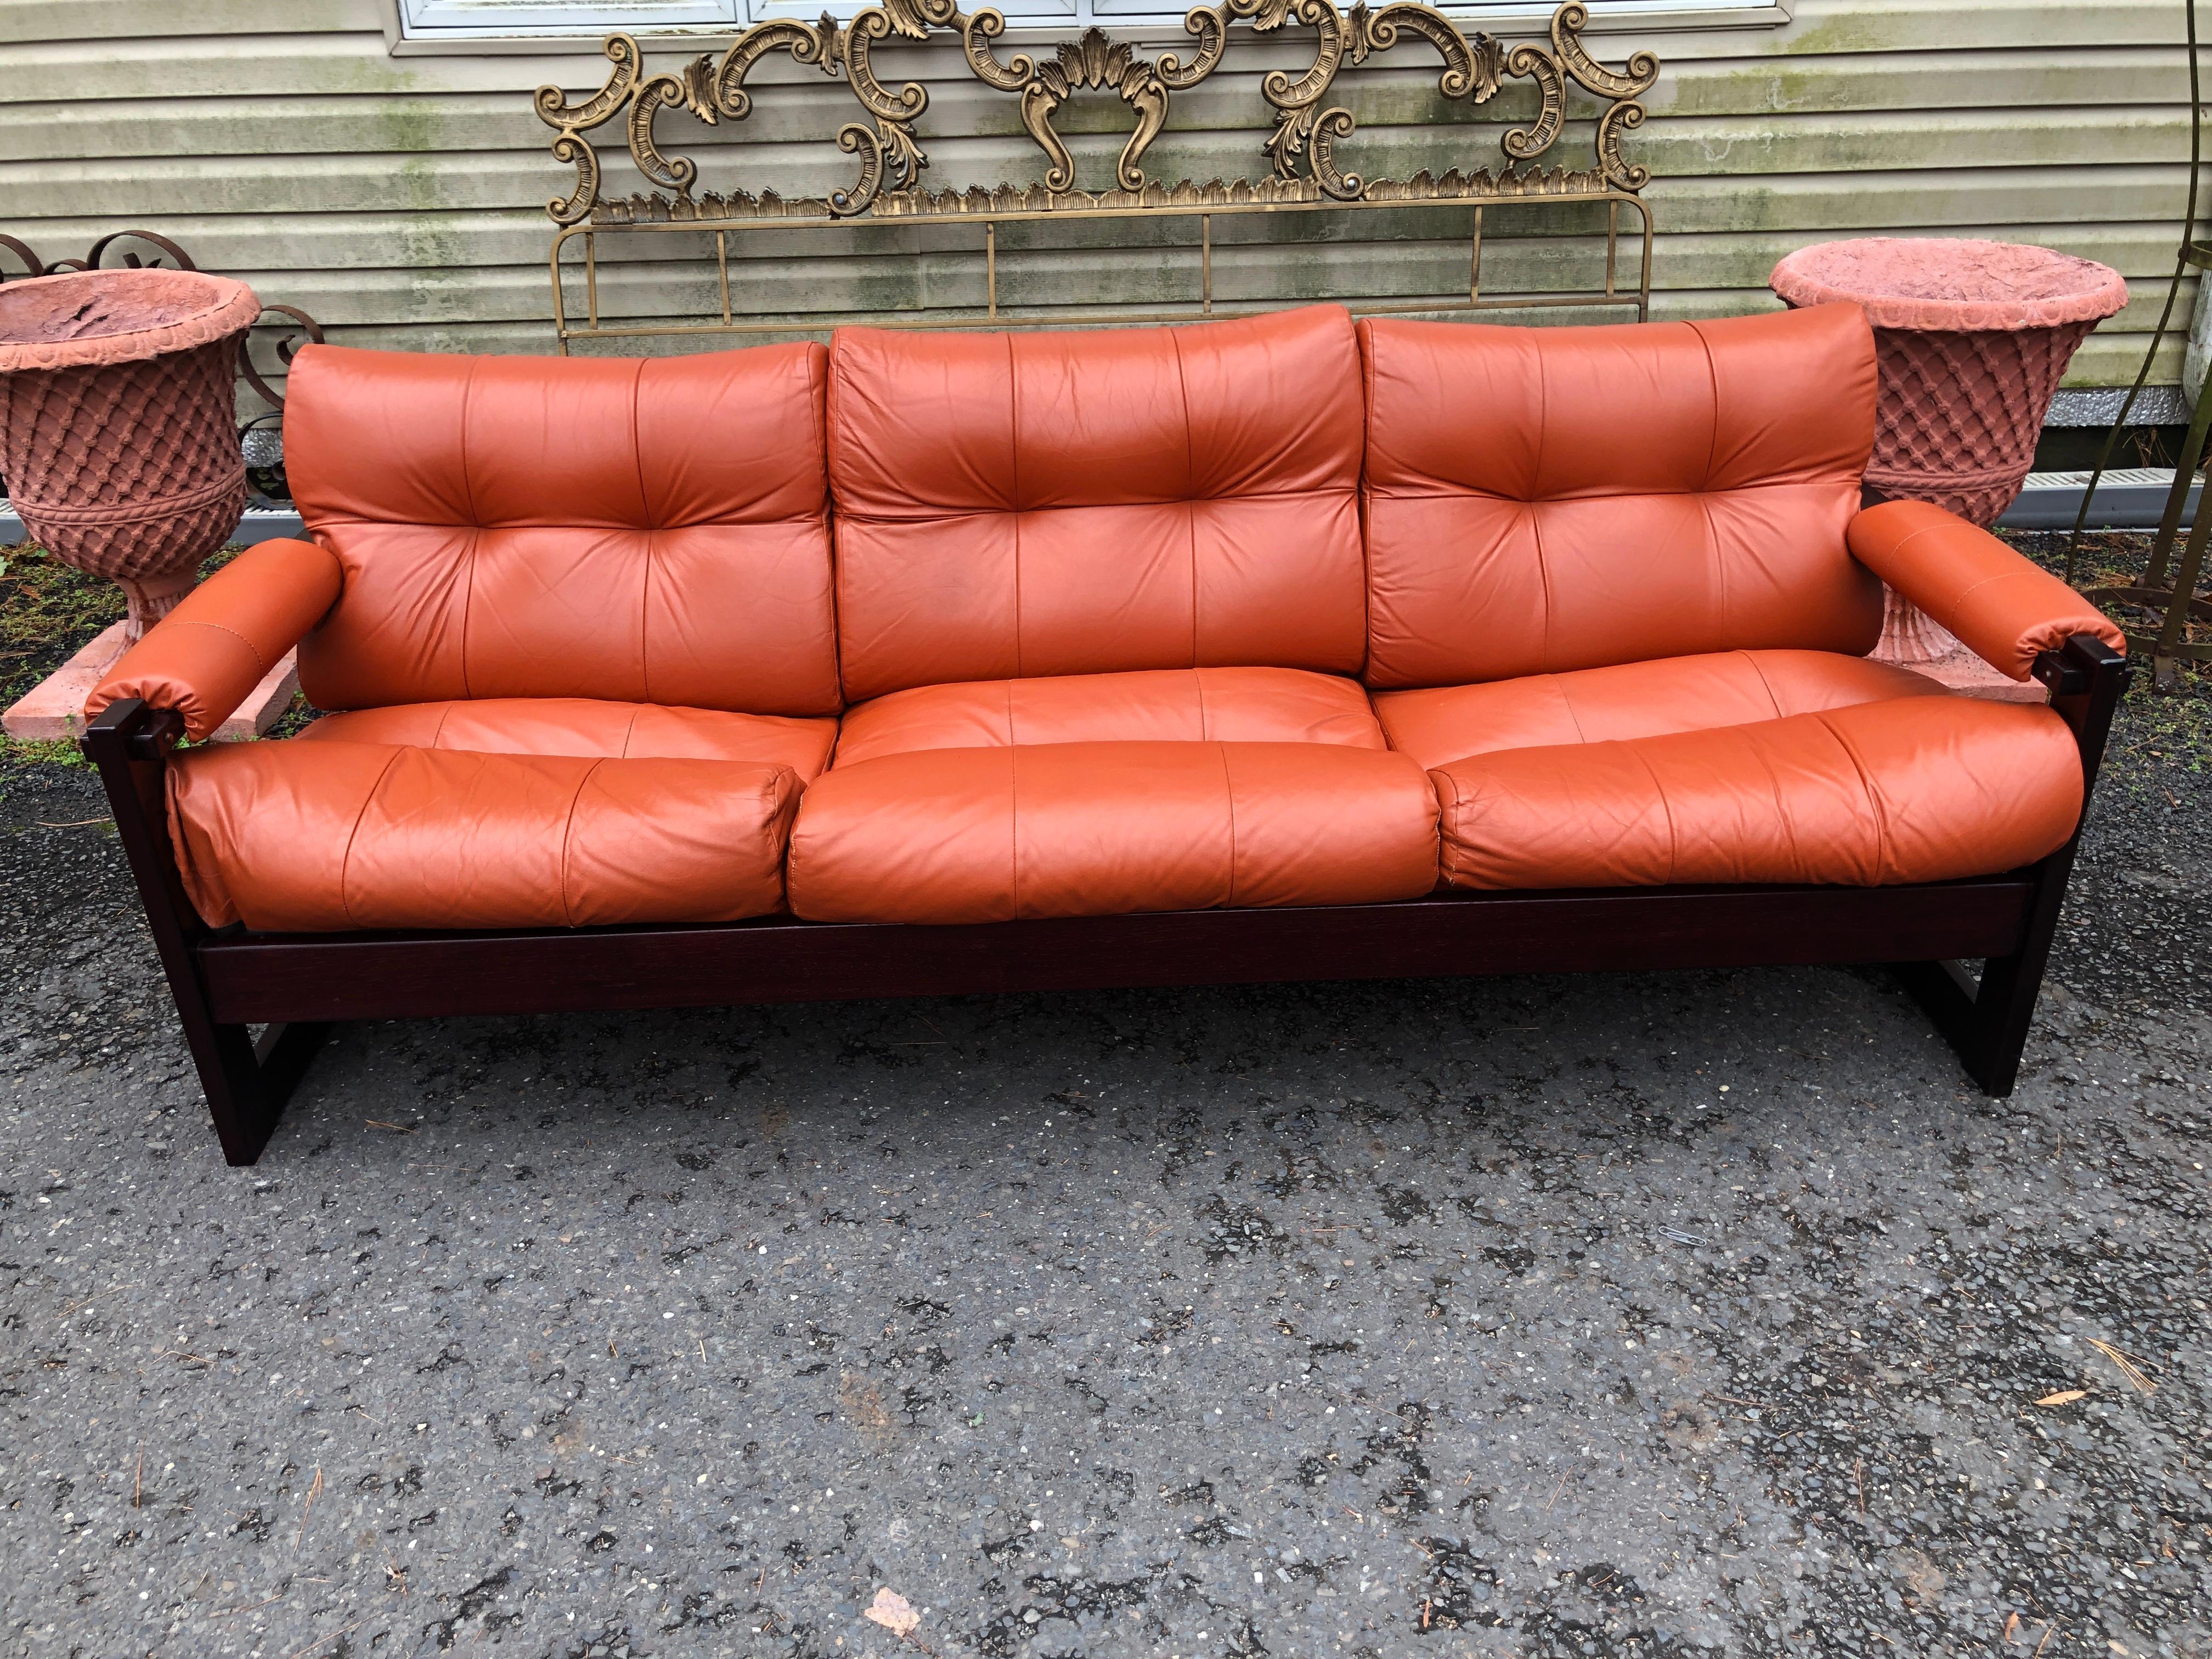 Wonderful Percival Lafer rosewood and leather 3-seater S-1 sofa.  The S-1 design features Brazilian exoticness paired with Scandinavian sensibility.  Of Lafer's designs, the S-1 is a bit more rare to find than some of his more common ones such as